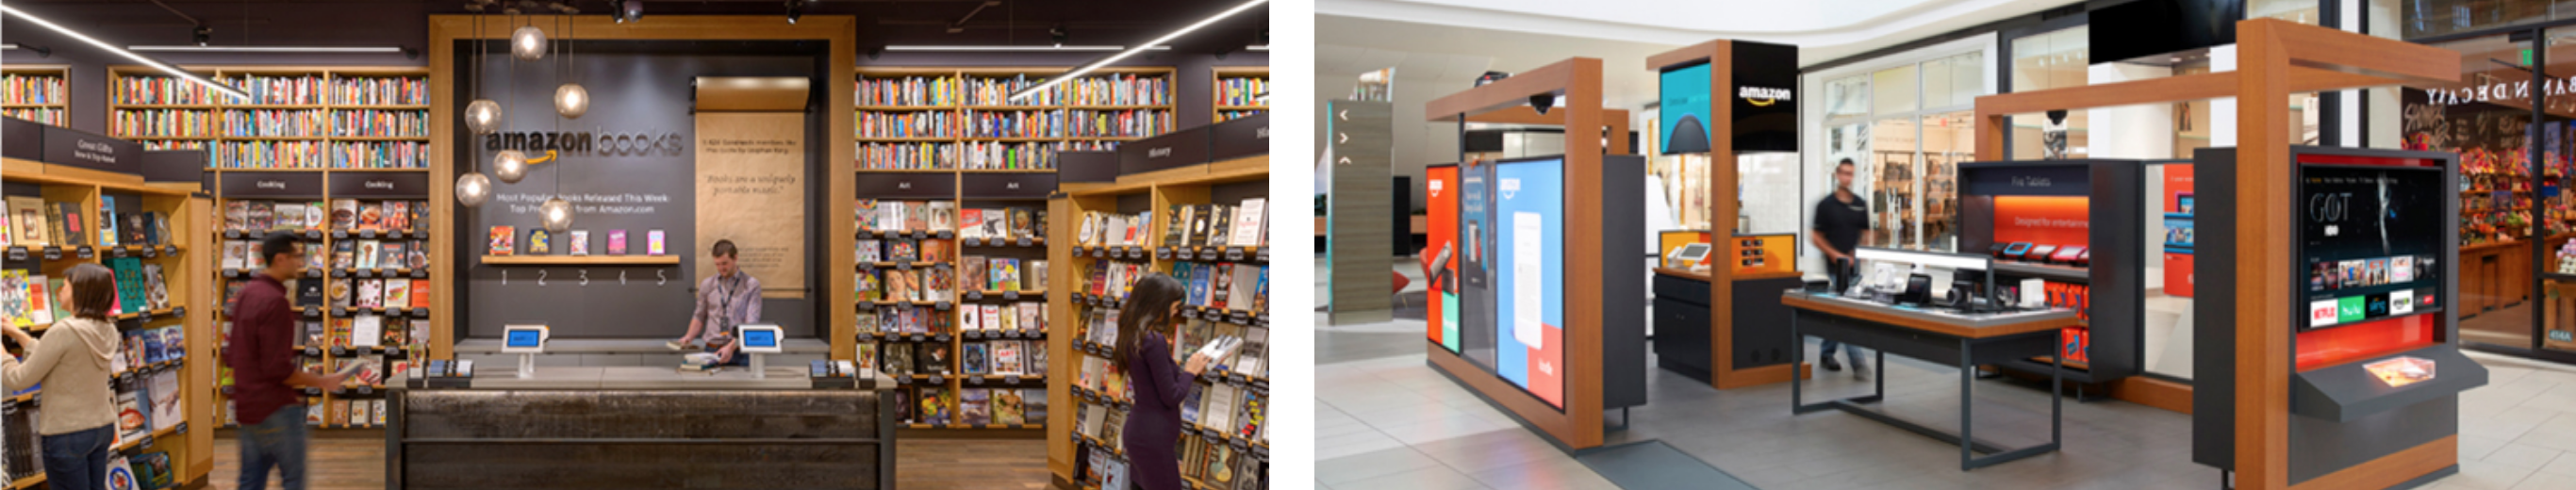 Amazon pop-up and bookstores